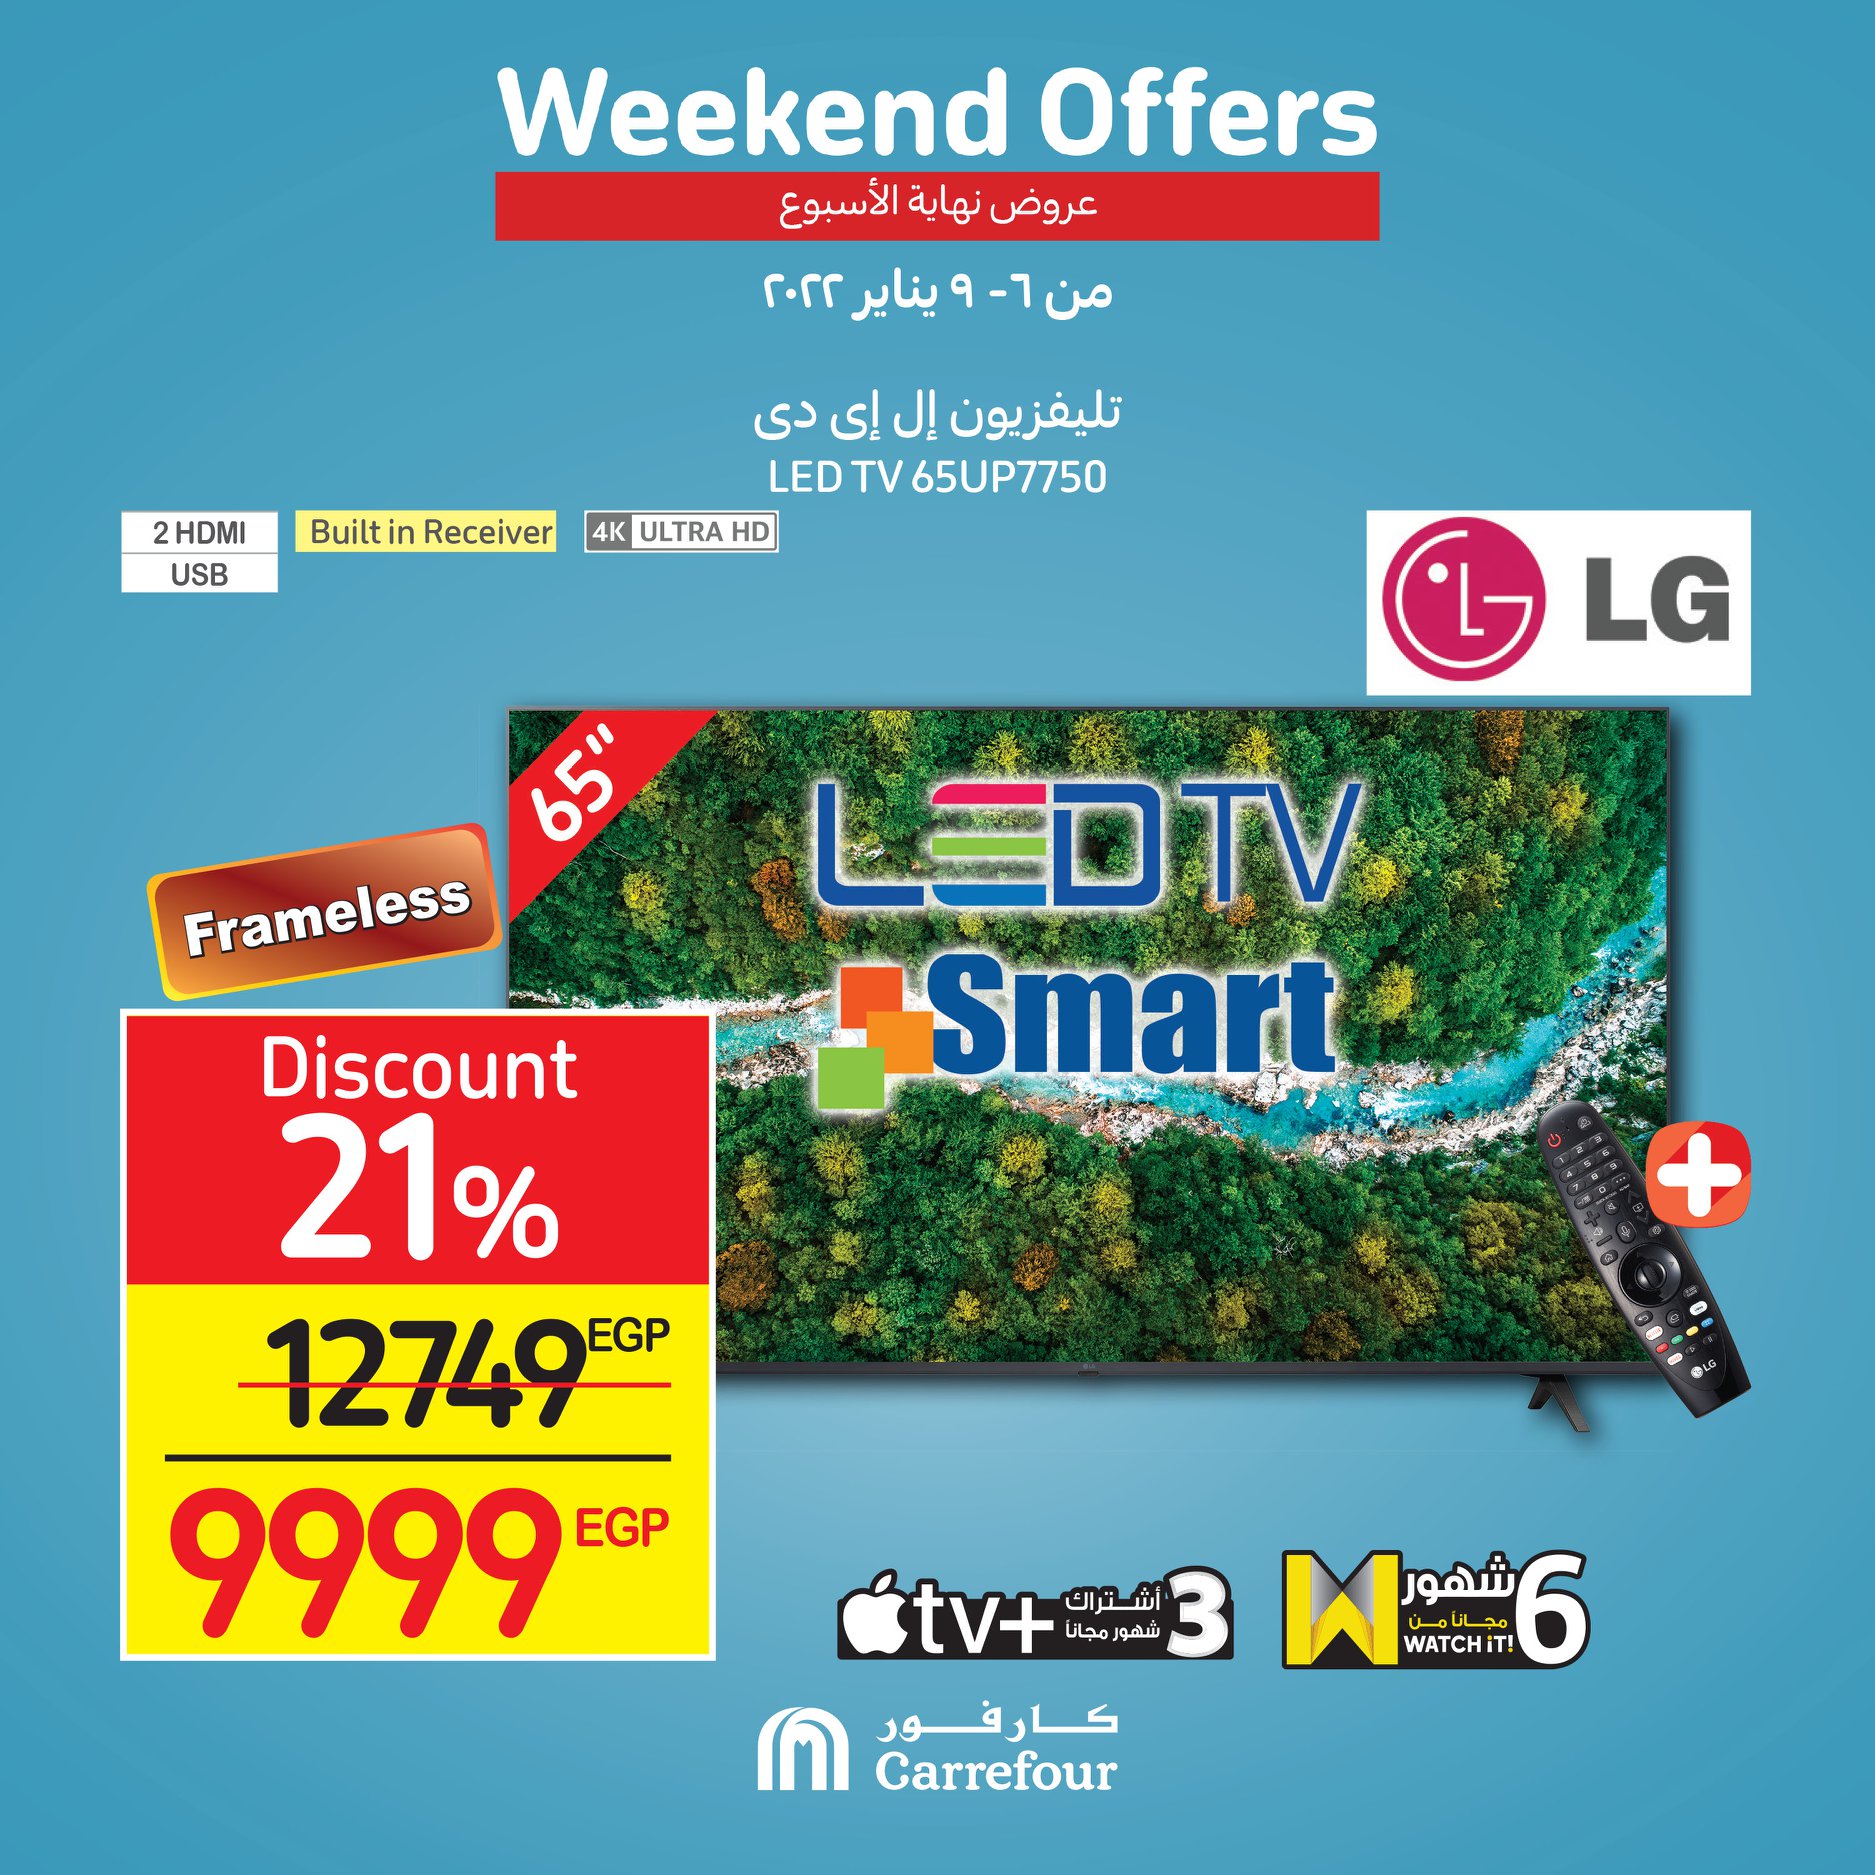 Now, the strongest Carrefour offers and surprises, half-price discounts, at Weekend, until January 16, 10